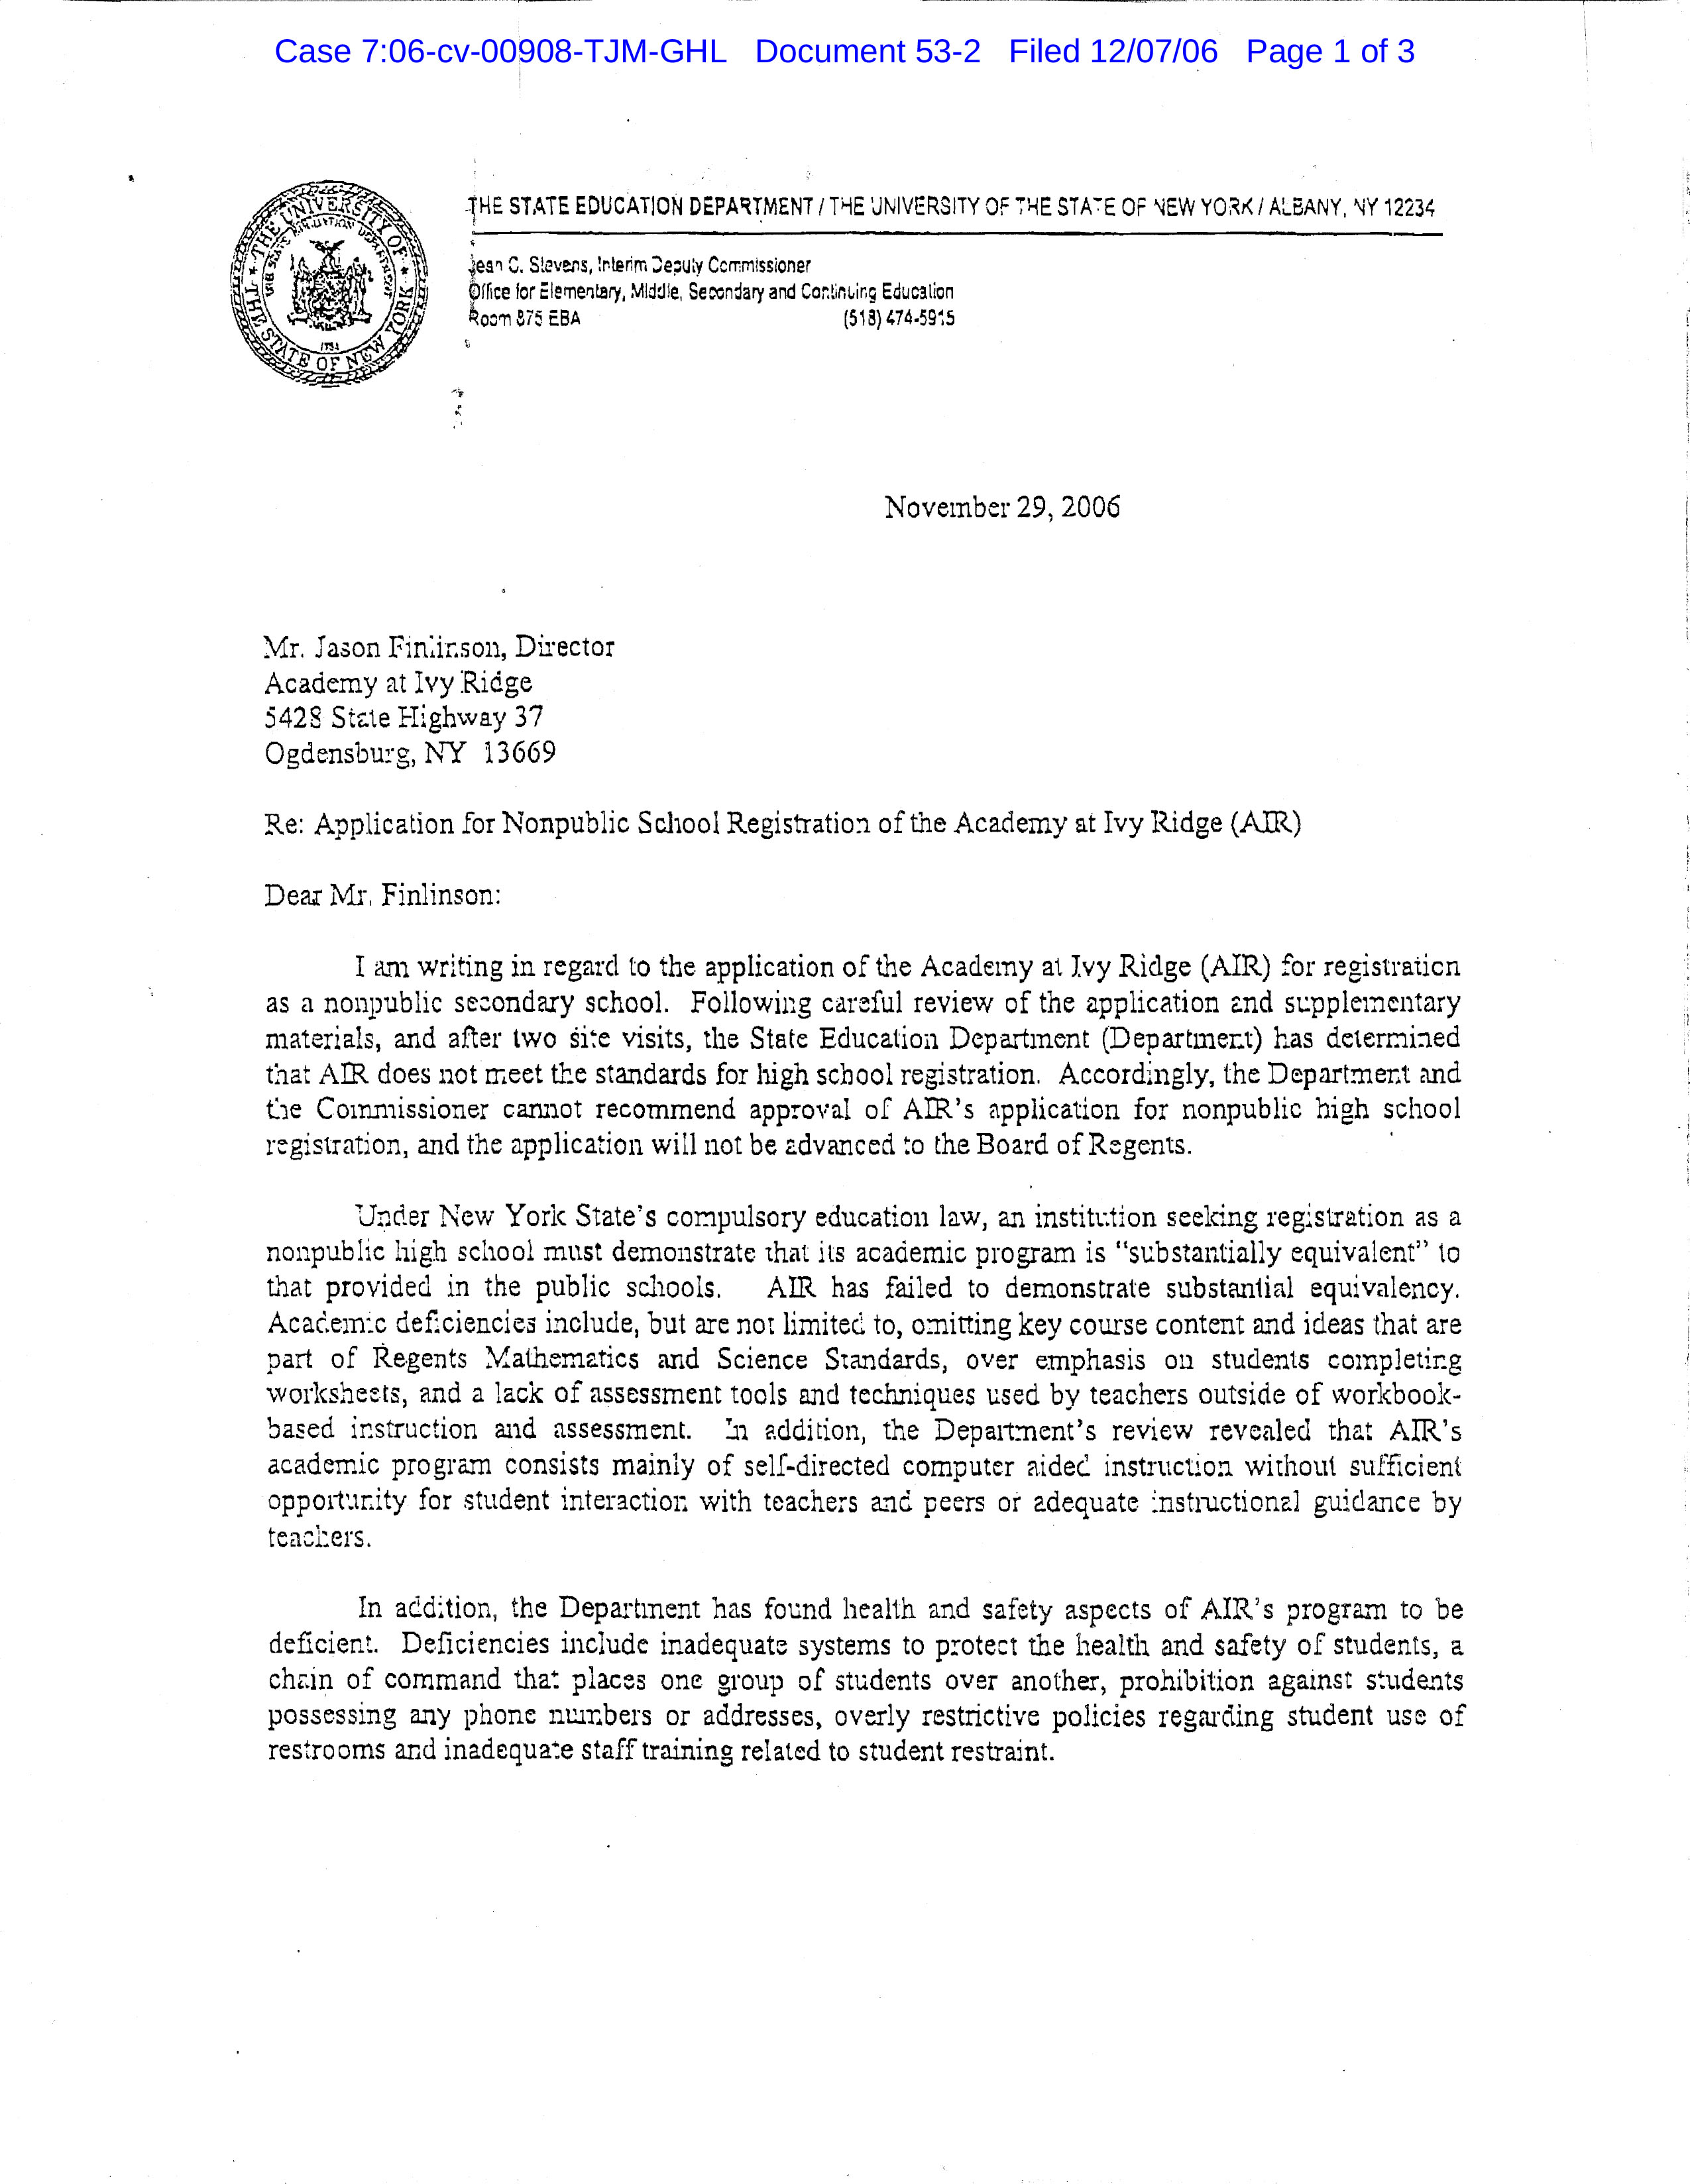 A letter obtained by The U.S. Sun shows officials raised concerns about conditions inside the school as early as August 2006